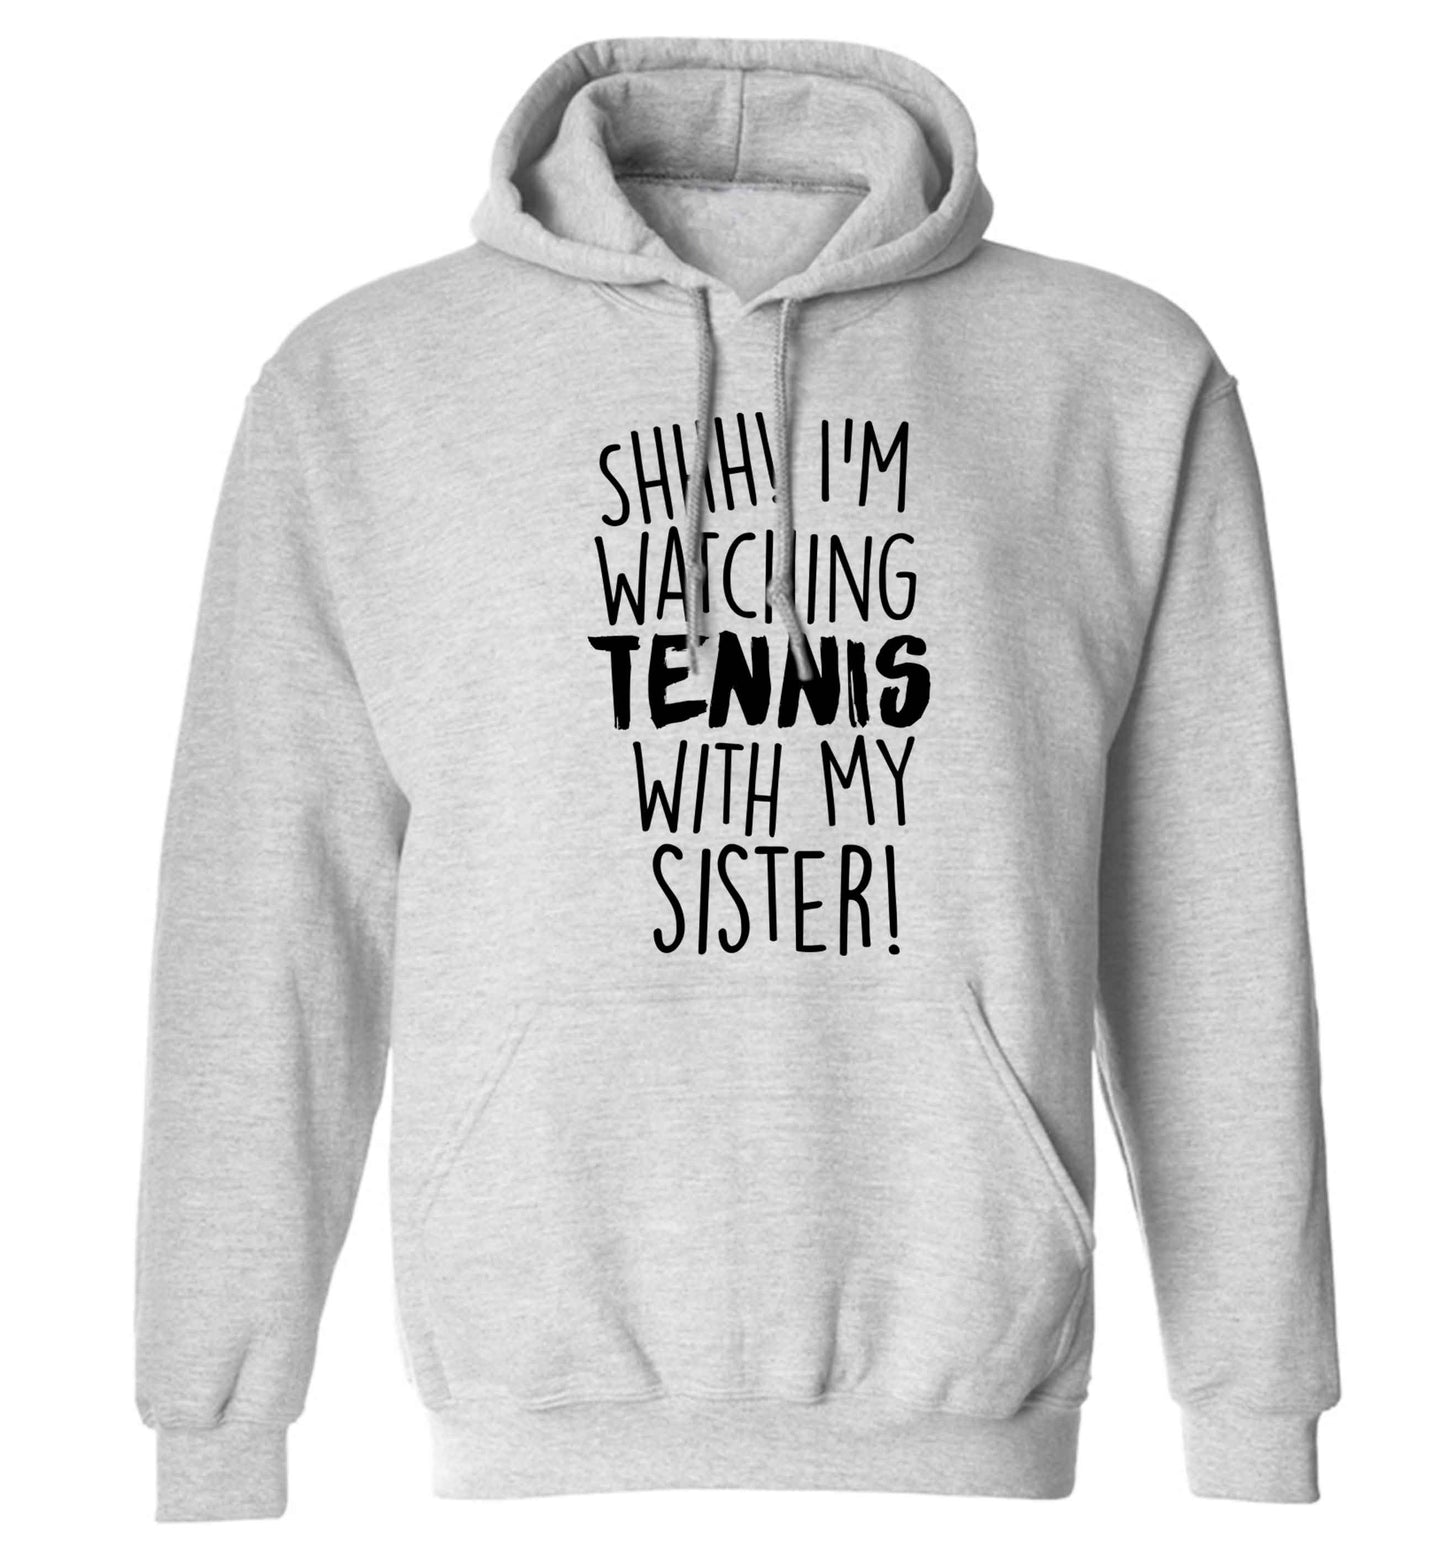 Shh! I'm watching tennis with my sister! adults unisex grey hoodie 2XL